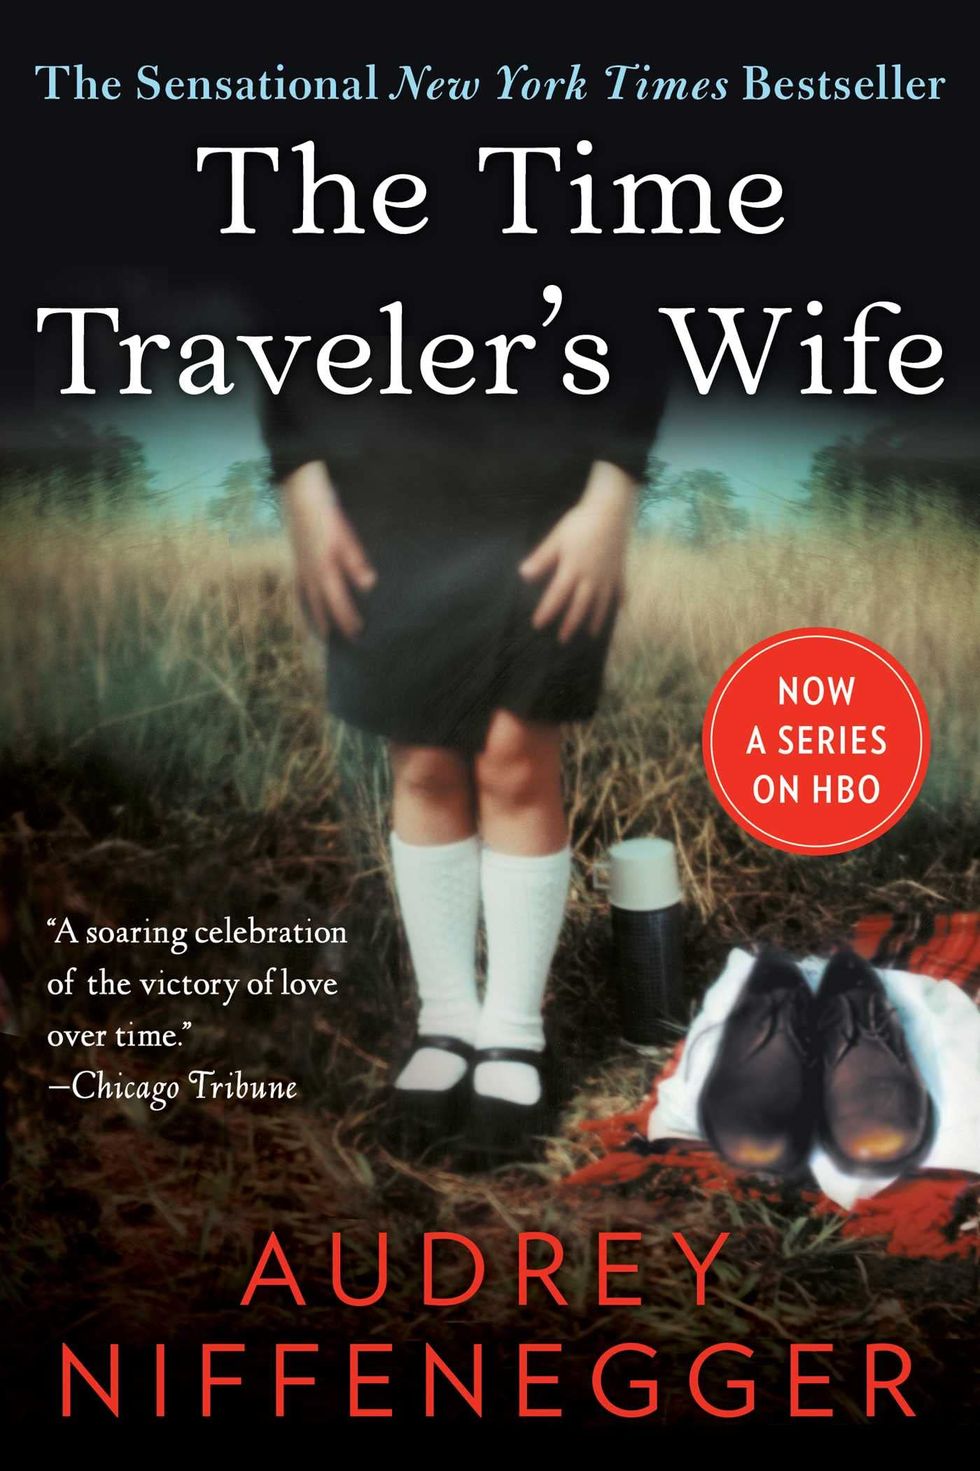 <i>The Time Traveler's Wife</i> by Audrey Niffenegger